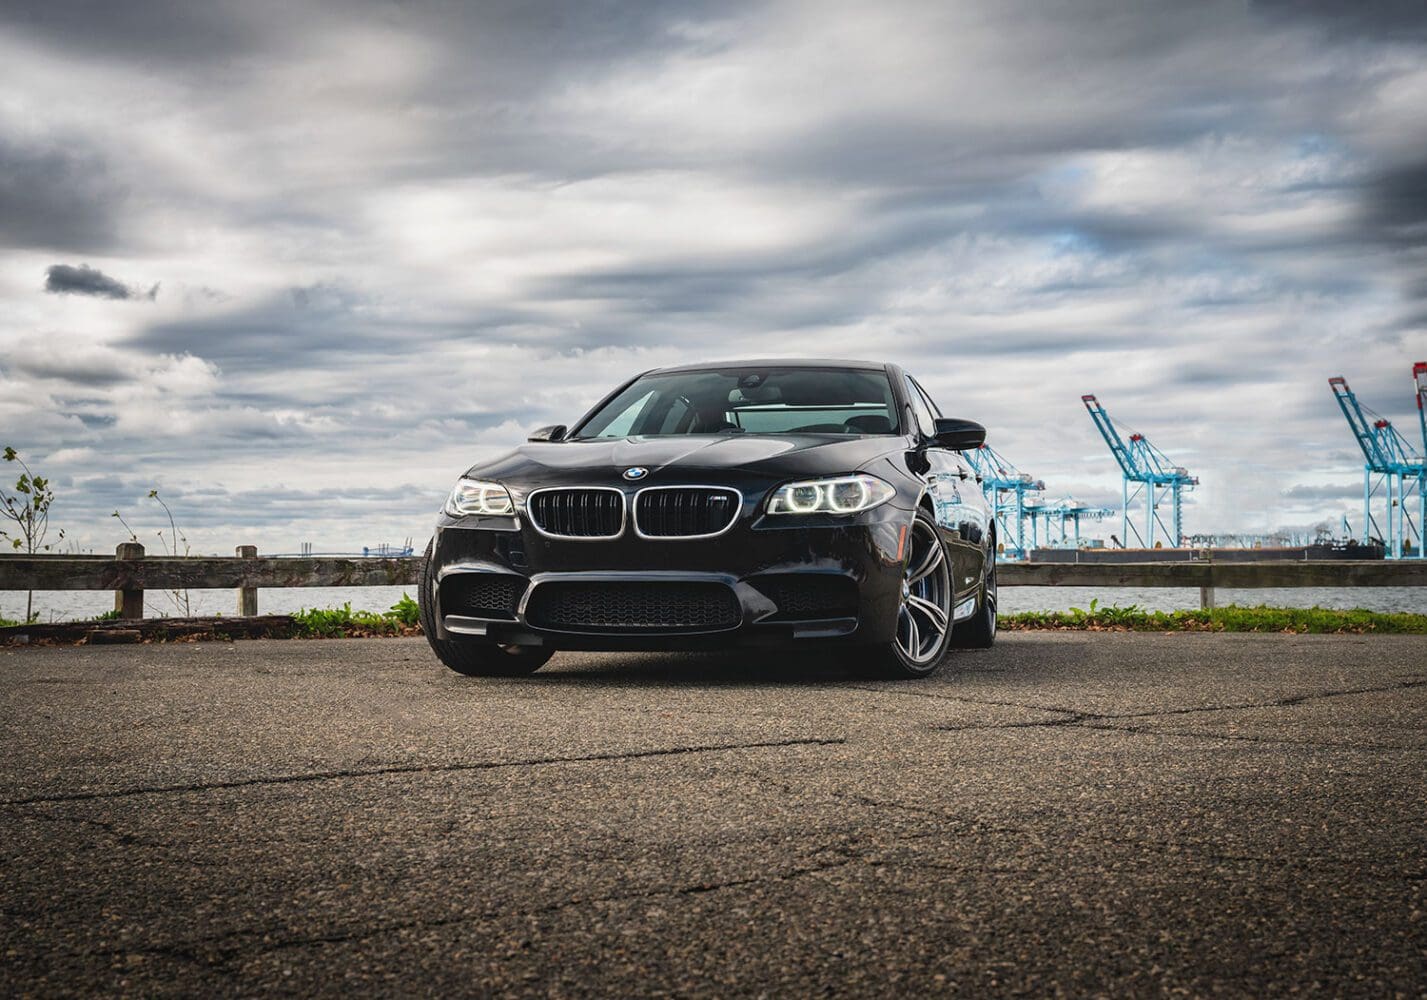 Heres What Its Like Driving a F10 BMW M5 With 73,073 Miles 